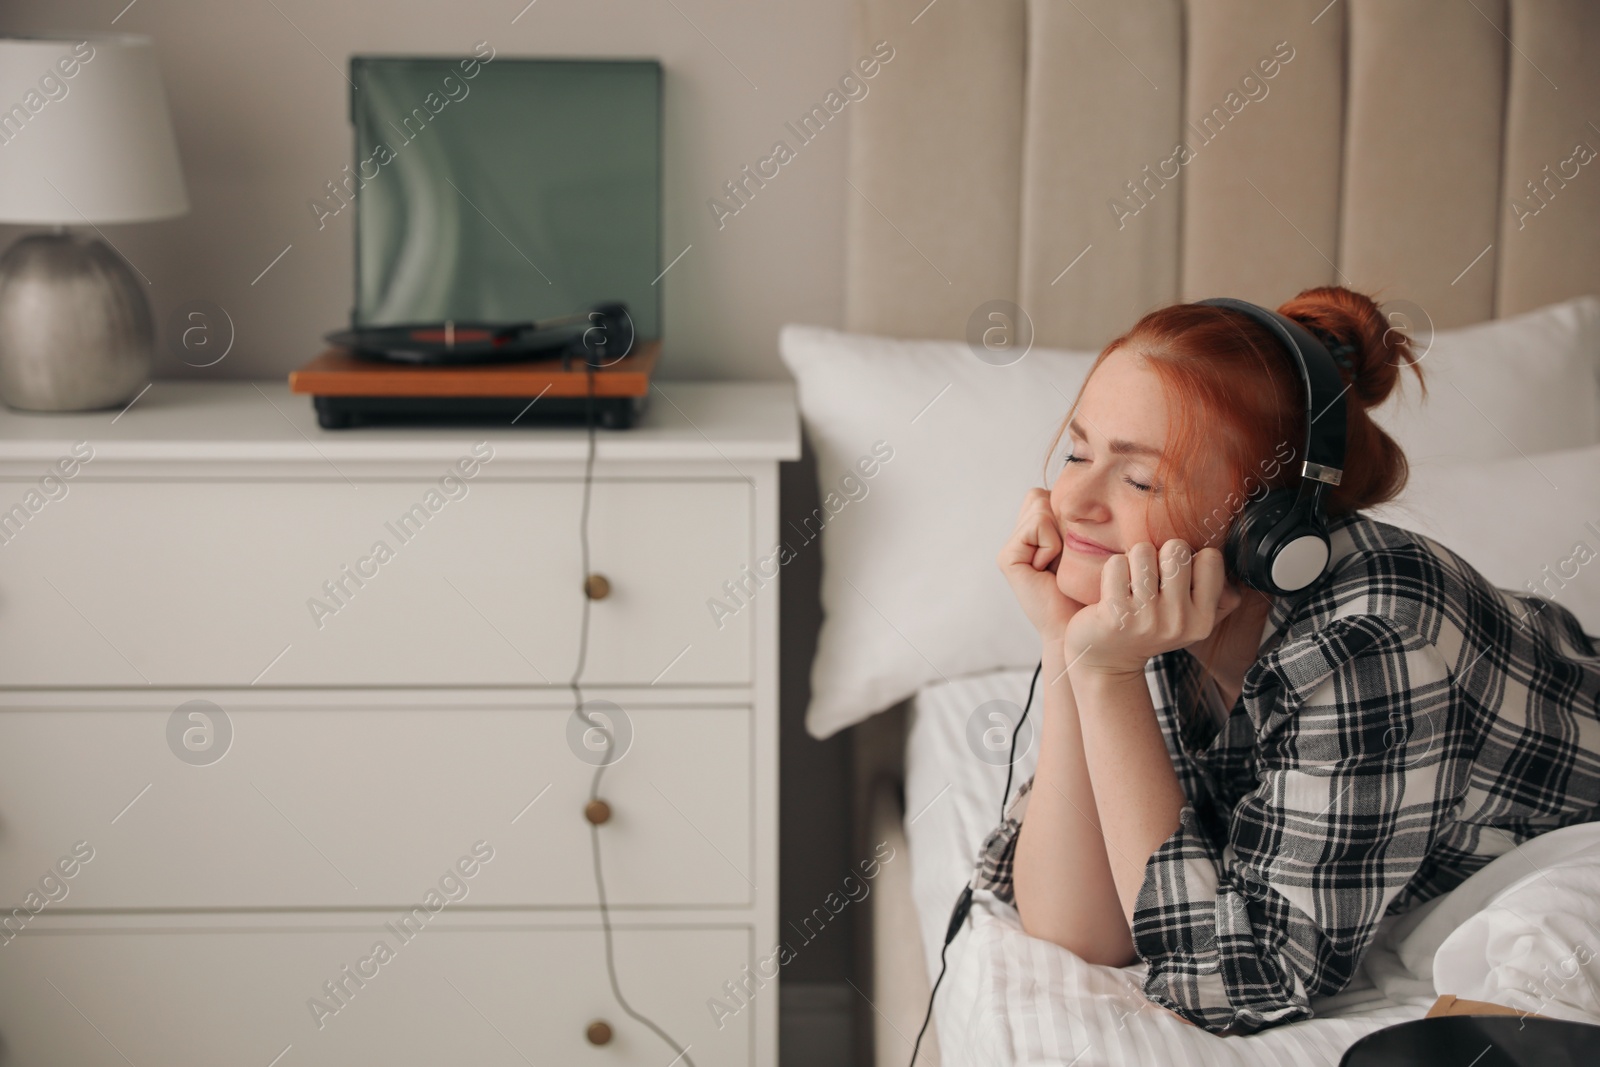 Photo of Young woman listening to music with turntable in bedroom